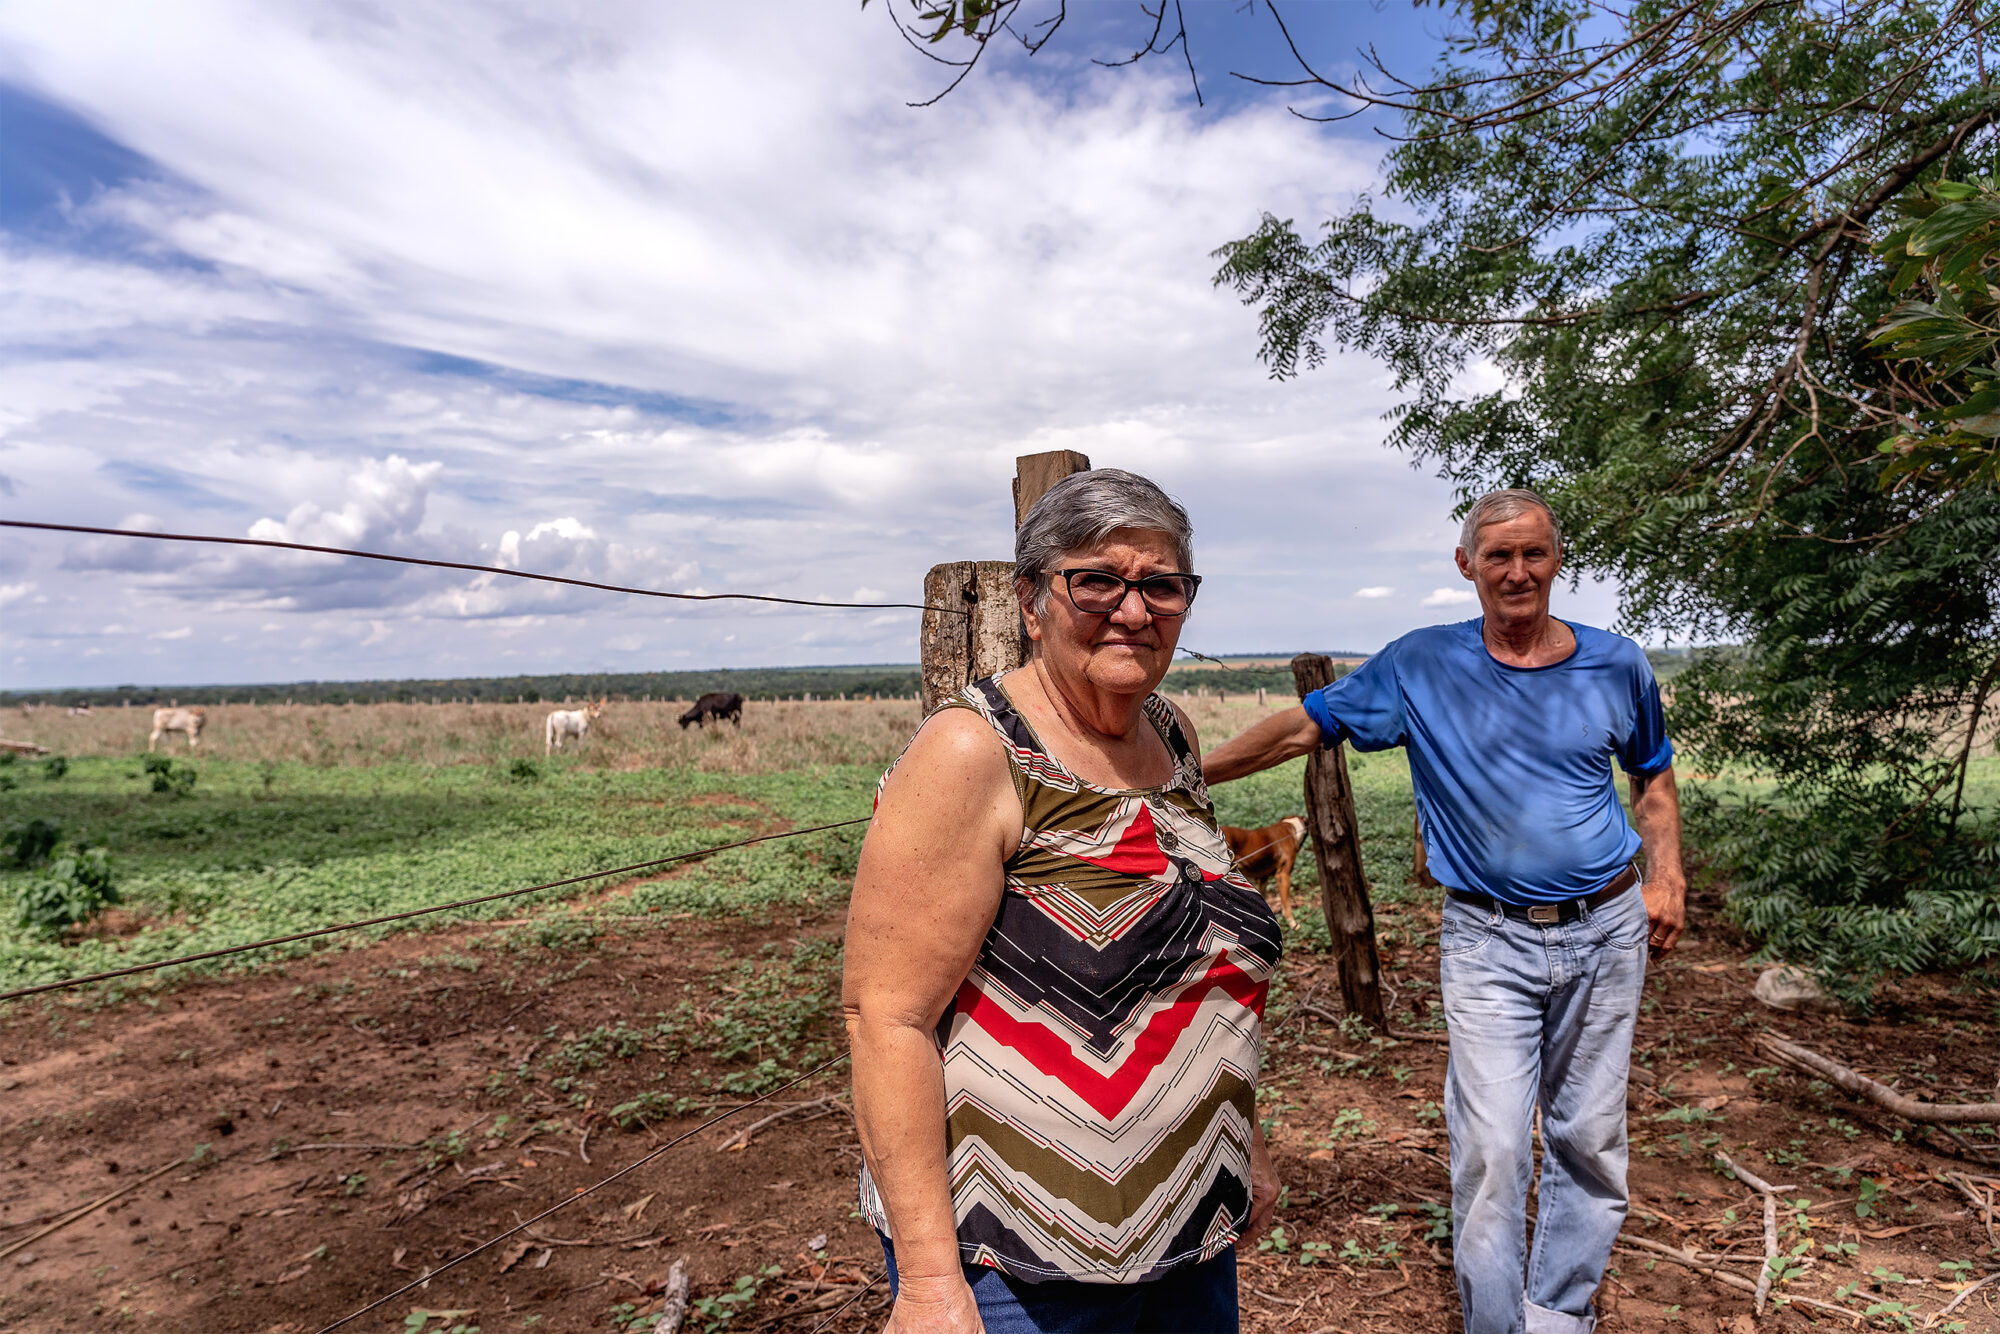 Brazilian smallholders , Evanir and Danilo Pertile, an elderley couple, stand in front of a fence bordering a soybean plantation